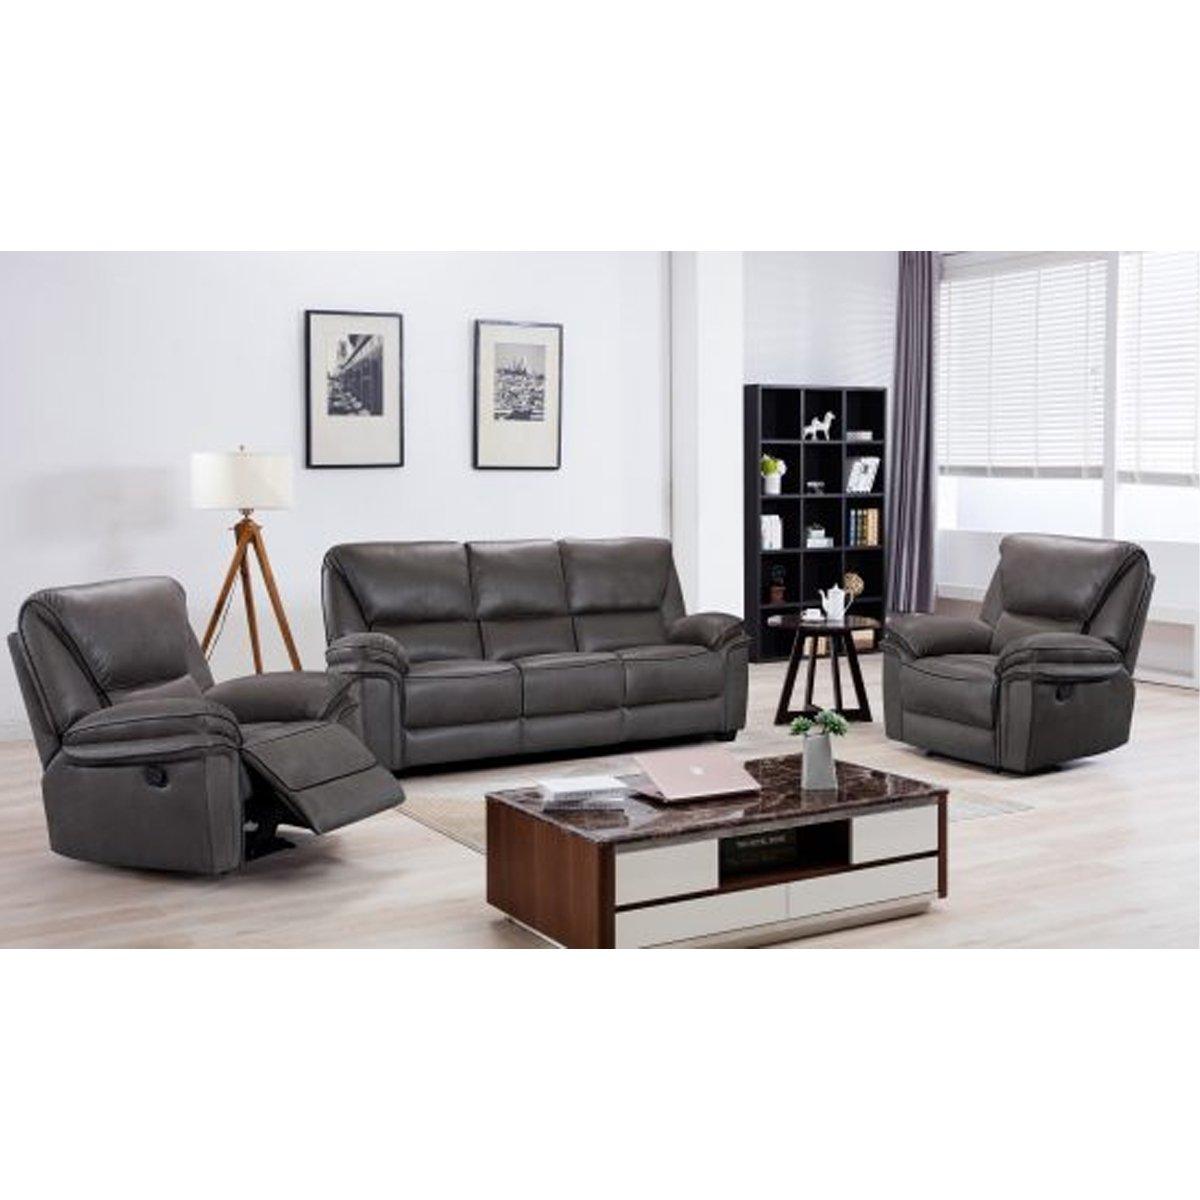 Boston Grey Fabric Large 3 Piece Sofa Suite Manual Reclining Armchairs + Static 3 Seater Seater Sofa